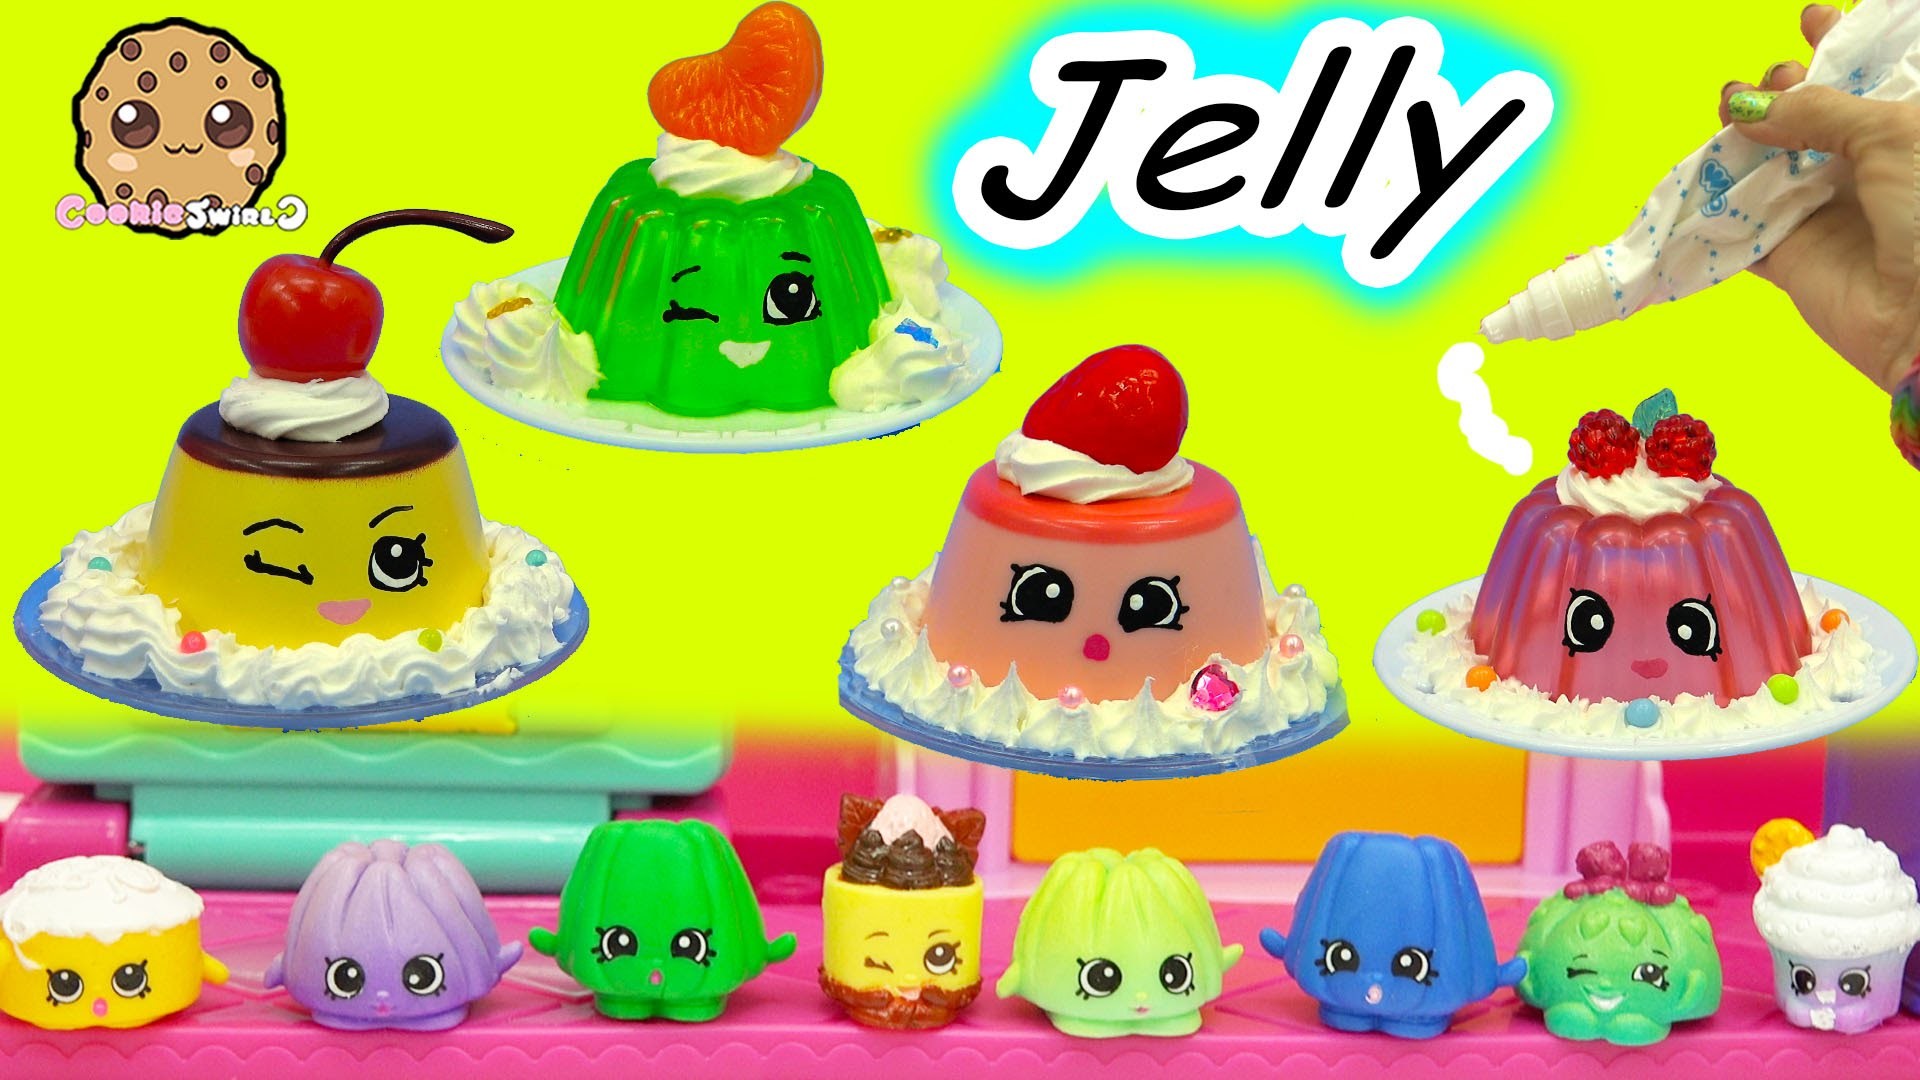 1920x1080 Whipple Cream Jelly Pudding Shopkins Season Inspired Easy Do It Yourself  Paint & Craft Video - YouTube